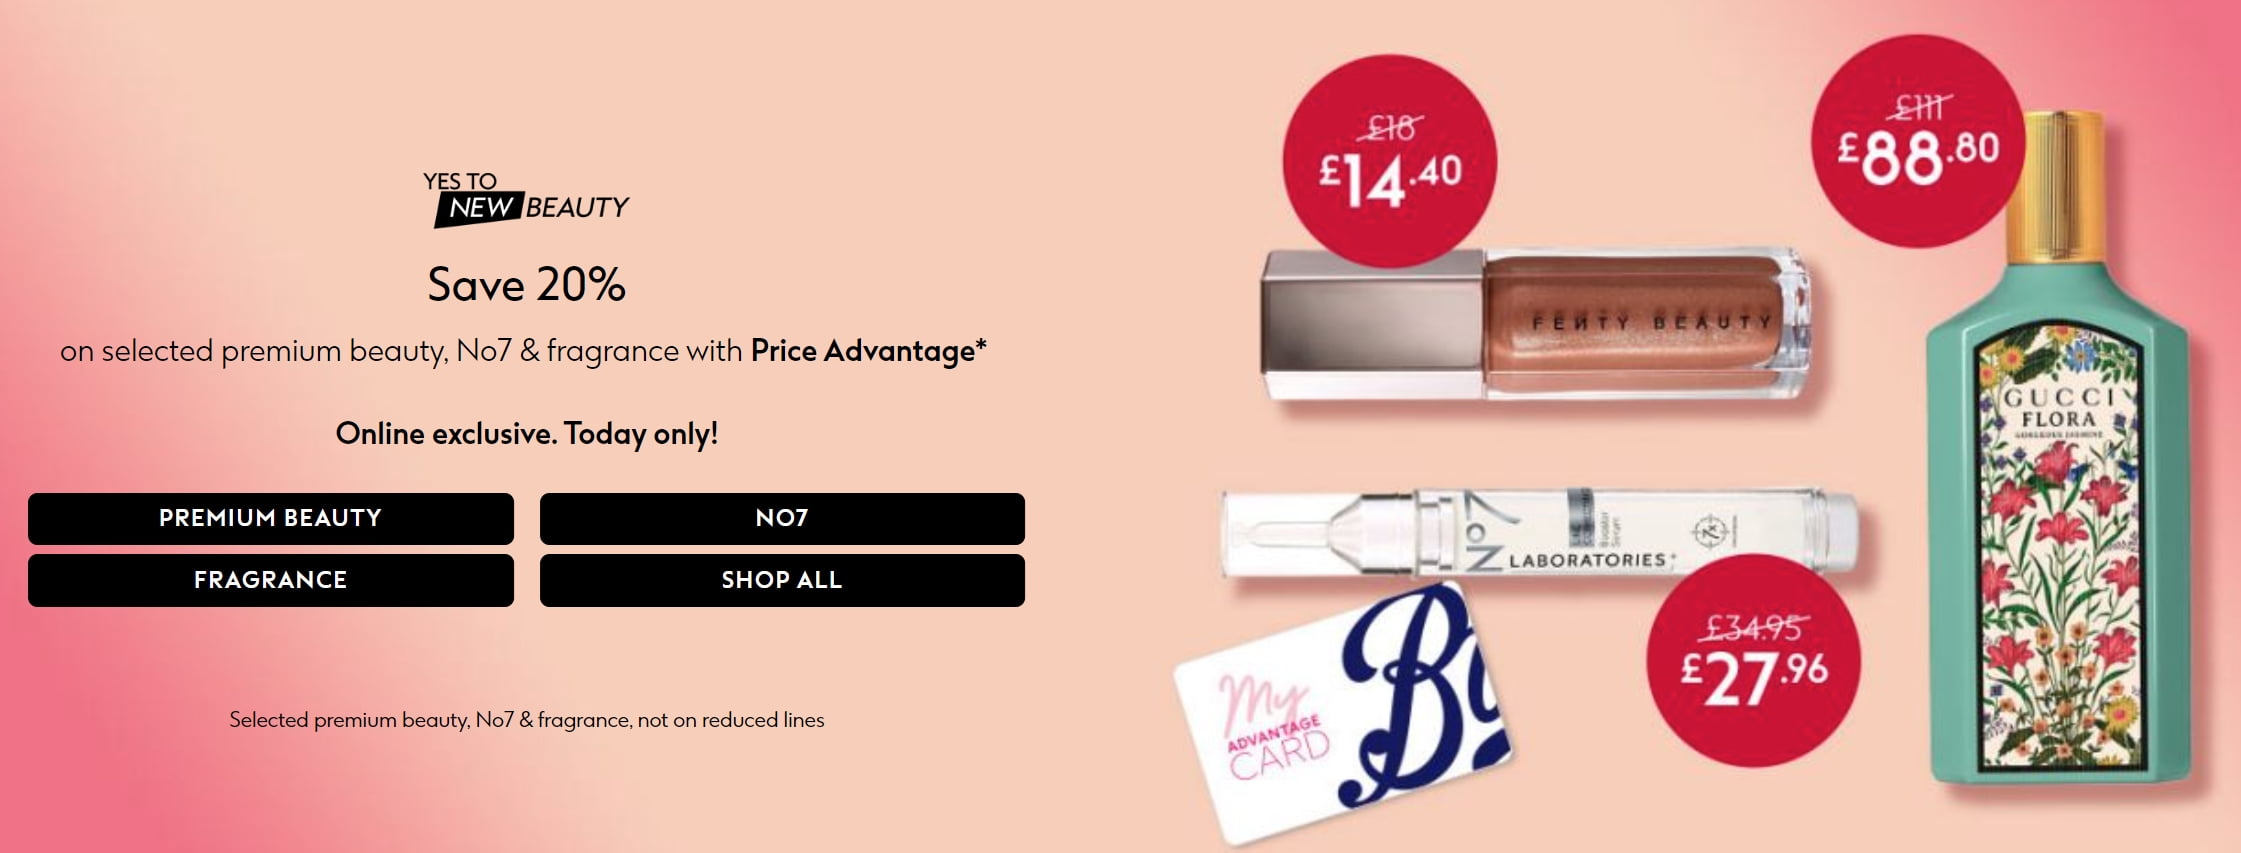 Save 20% on selected premium beauty and fragrance at Boots